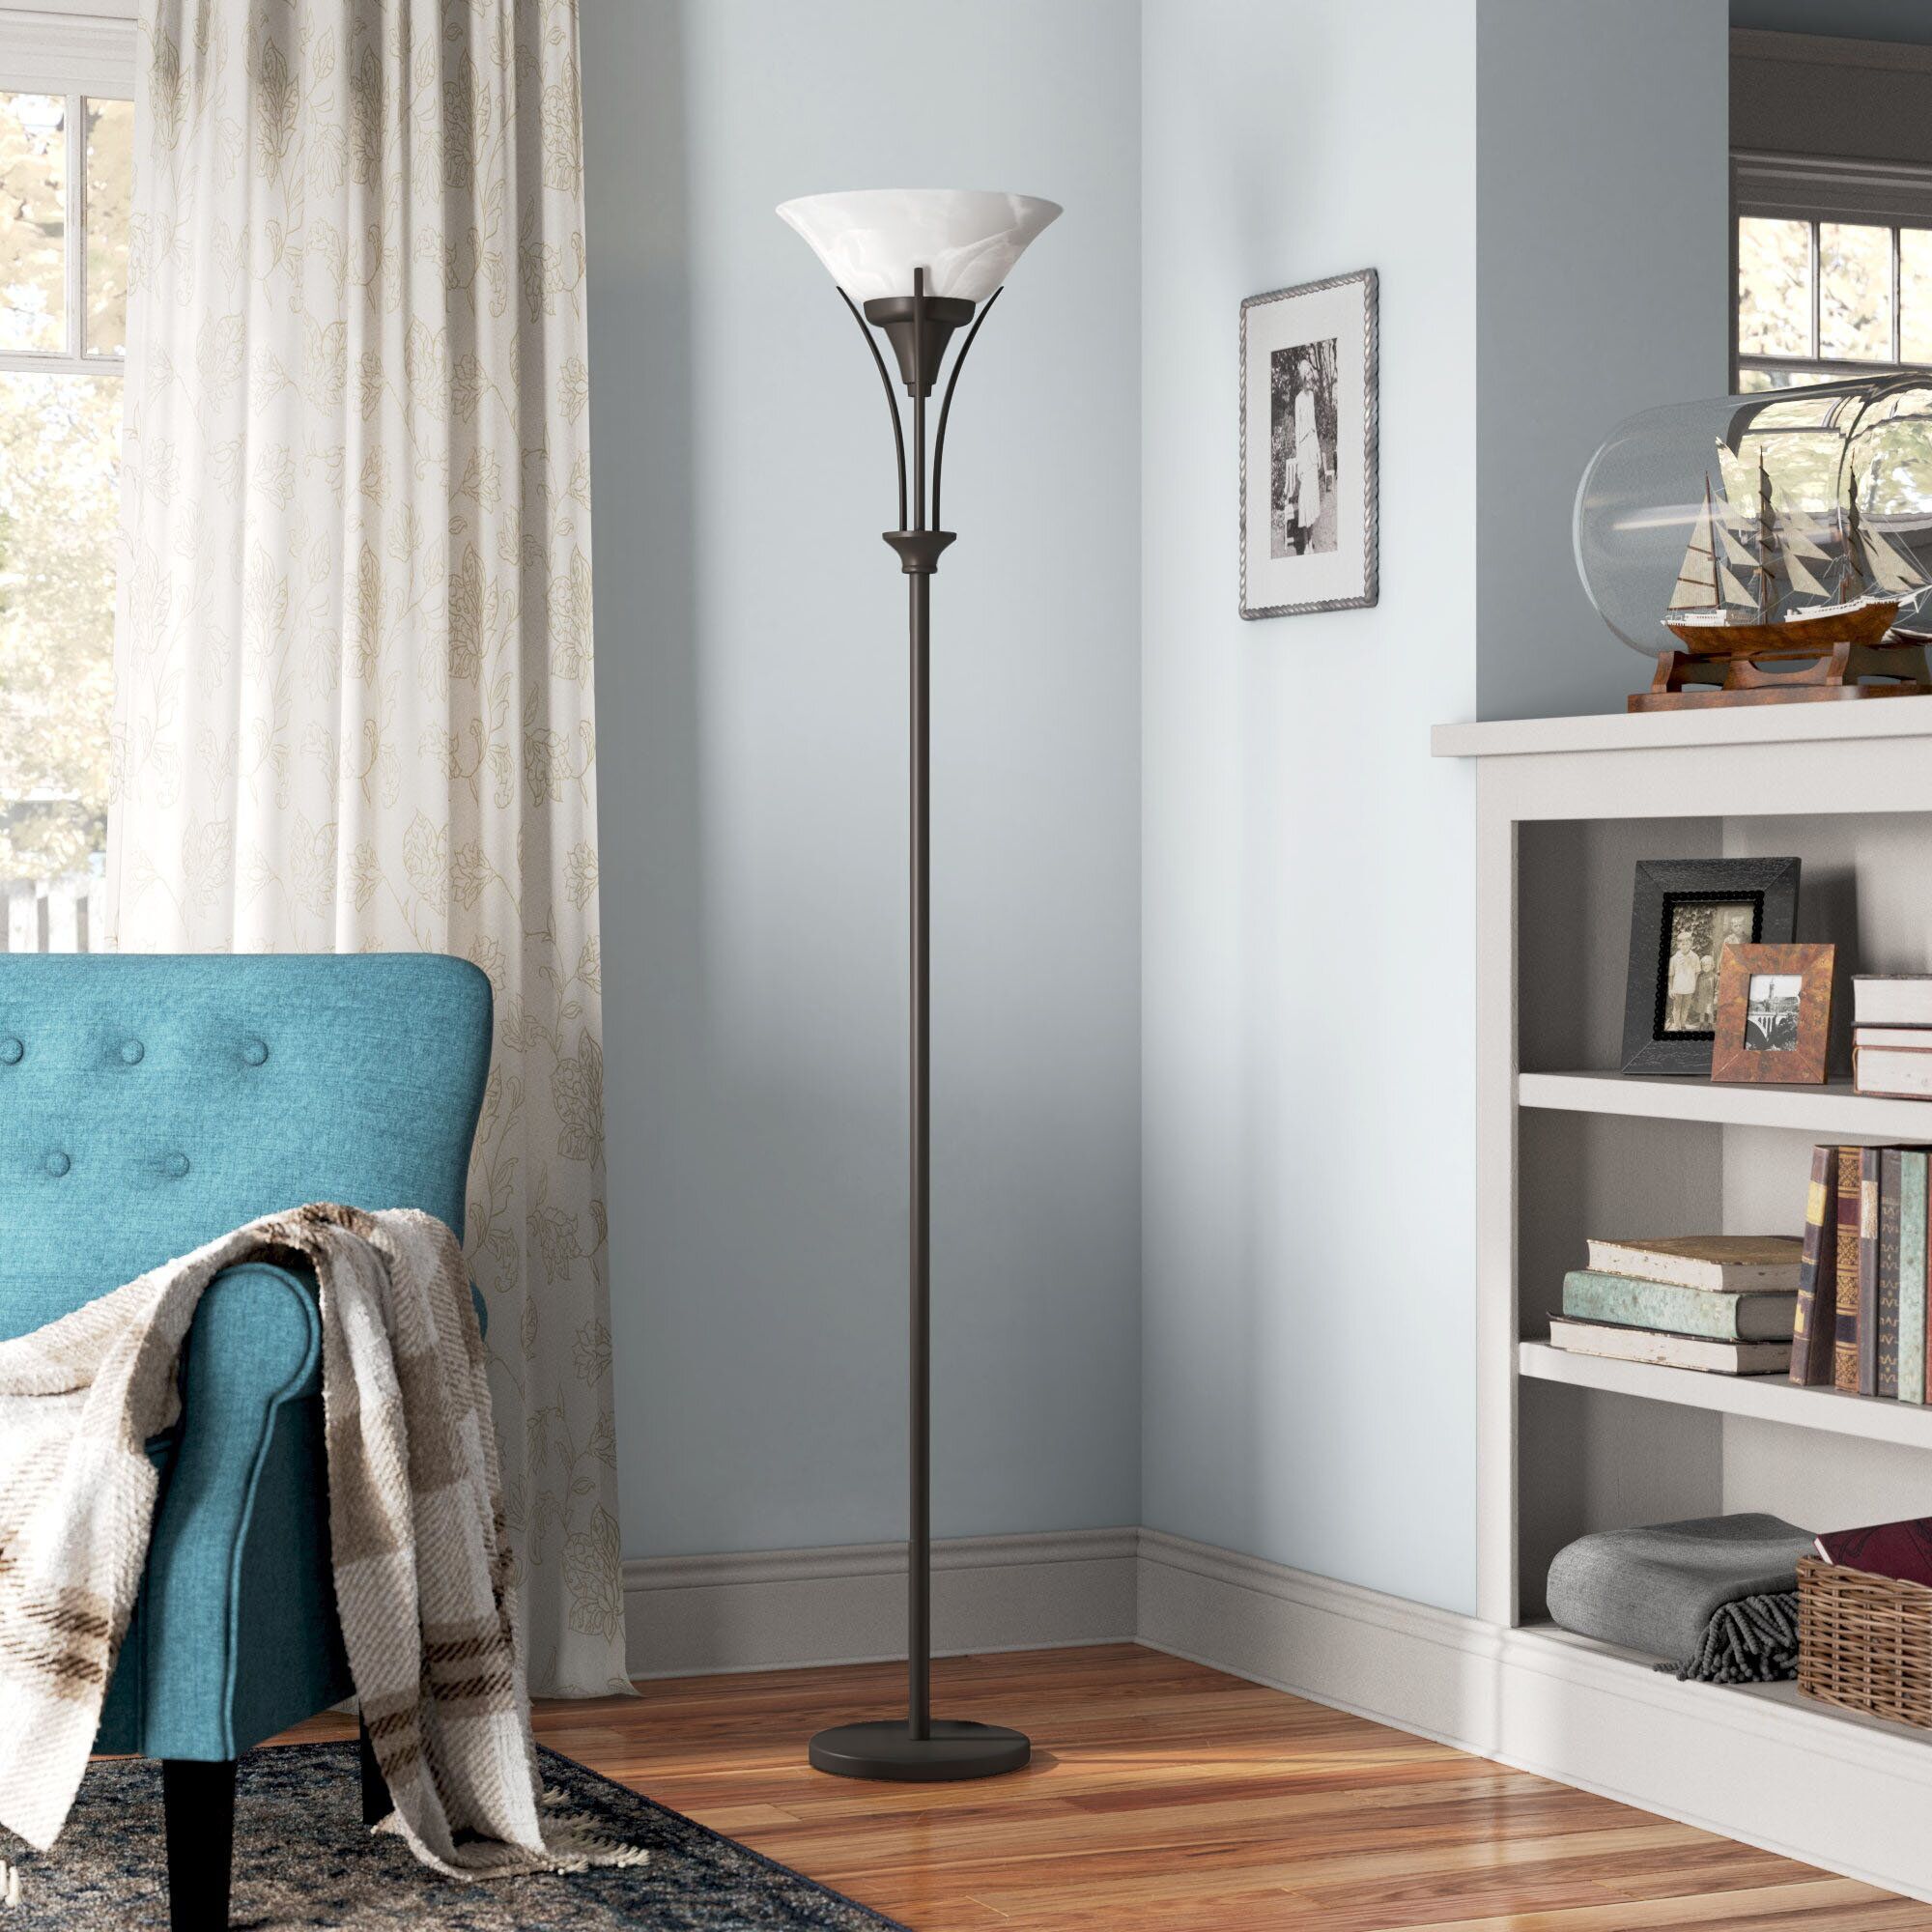 Wayfair | Extra Tall (70+ Inches) Floor Lamps Within 75 Inch Floor Lamps (View 3 of 15)